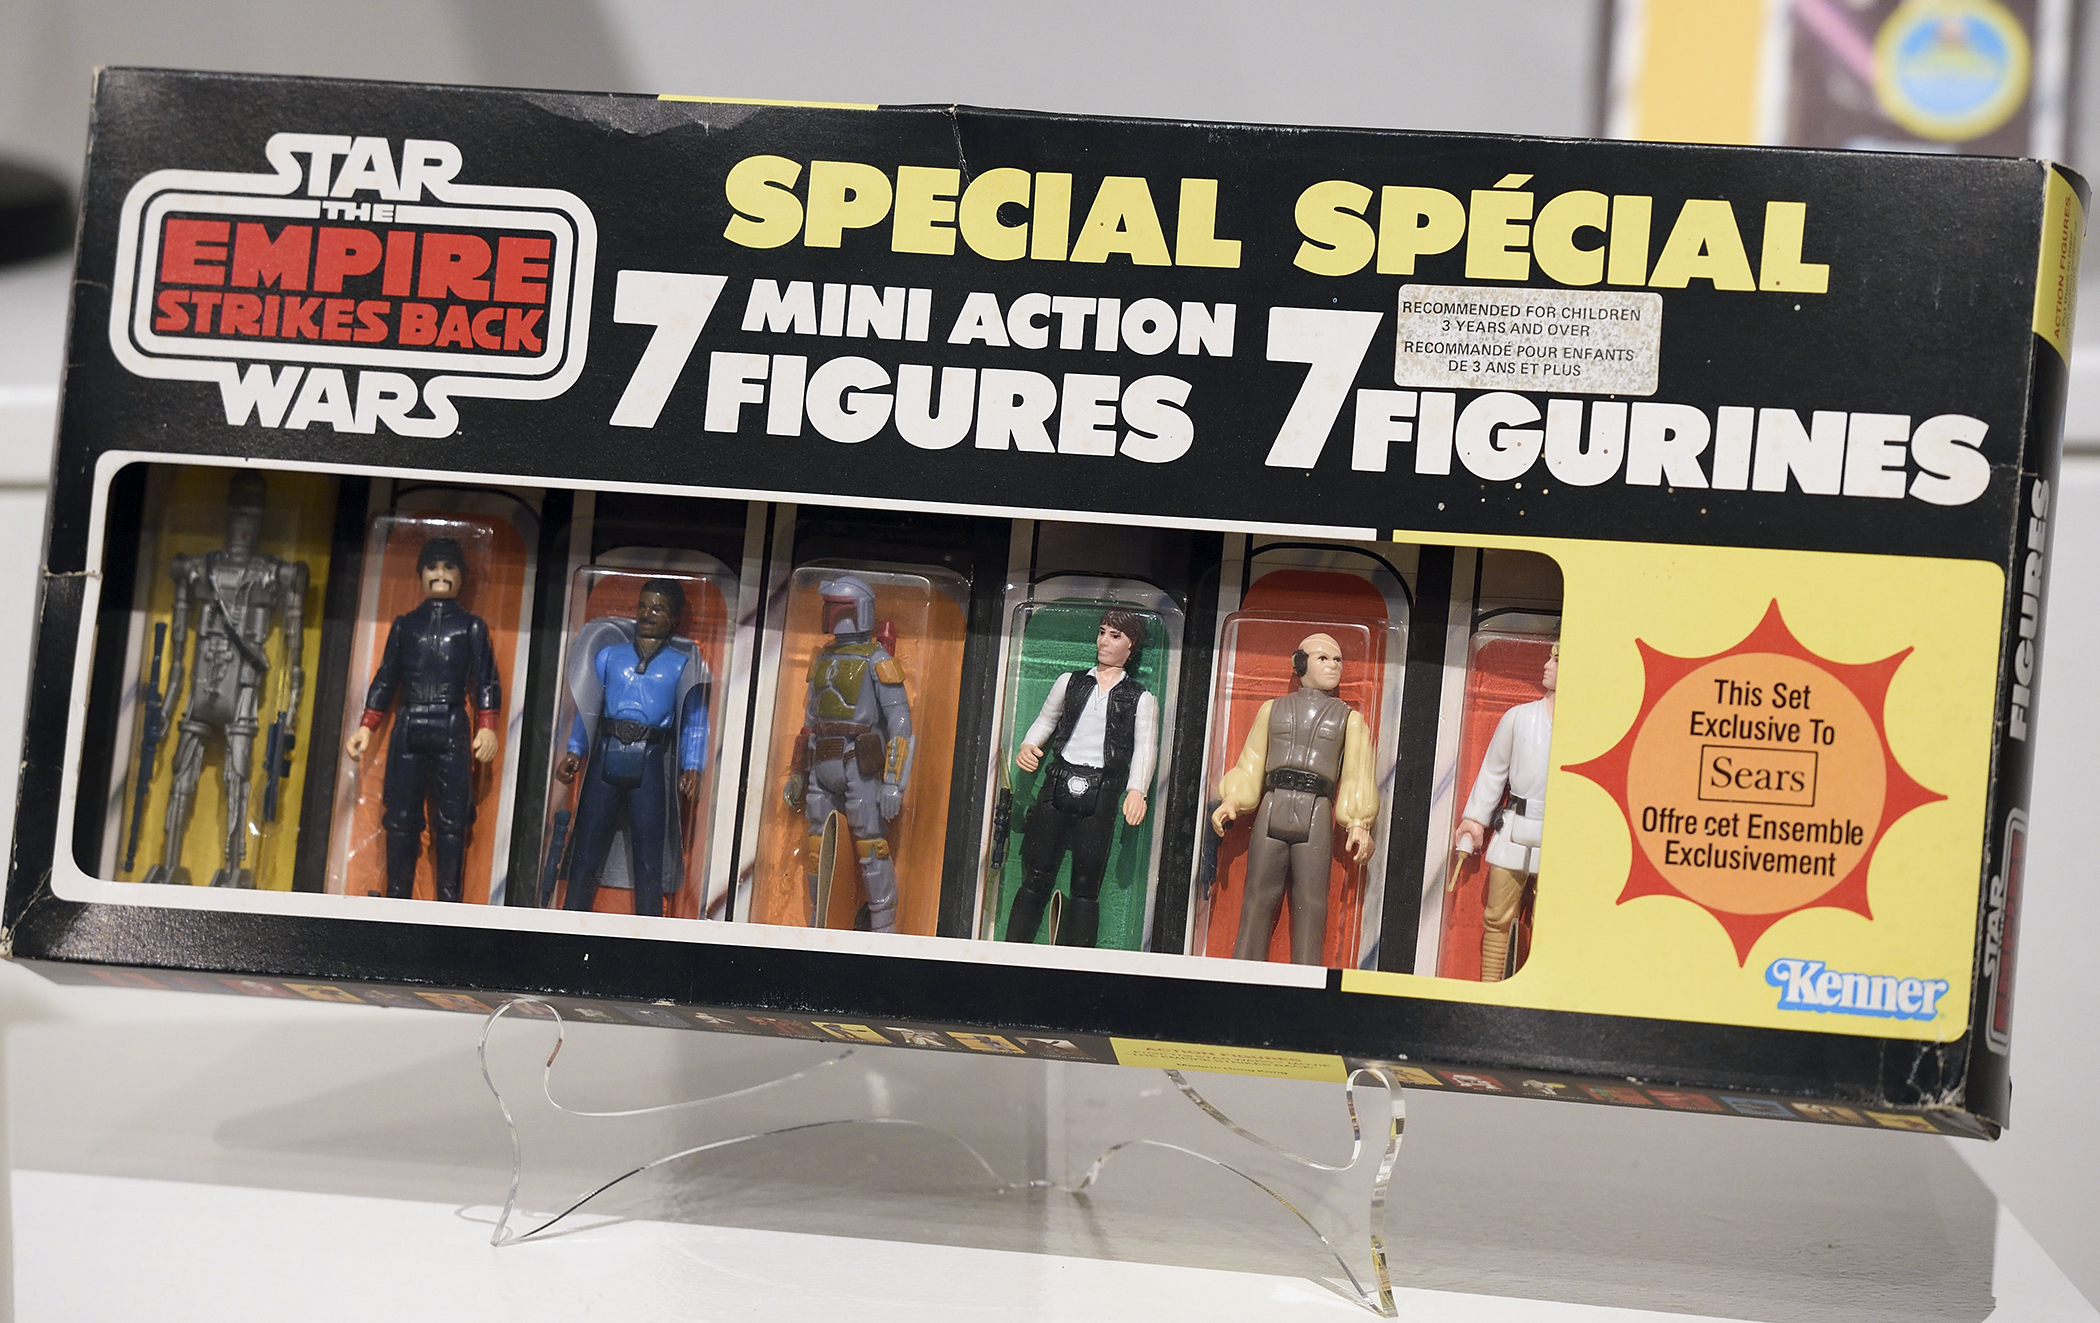 Star Wars May the Fourth Day: Deals, Costs of Collectibles | Money